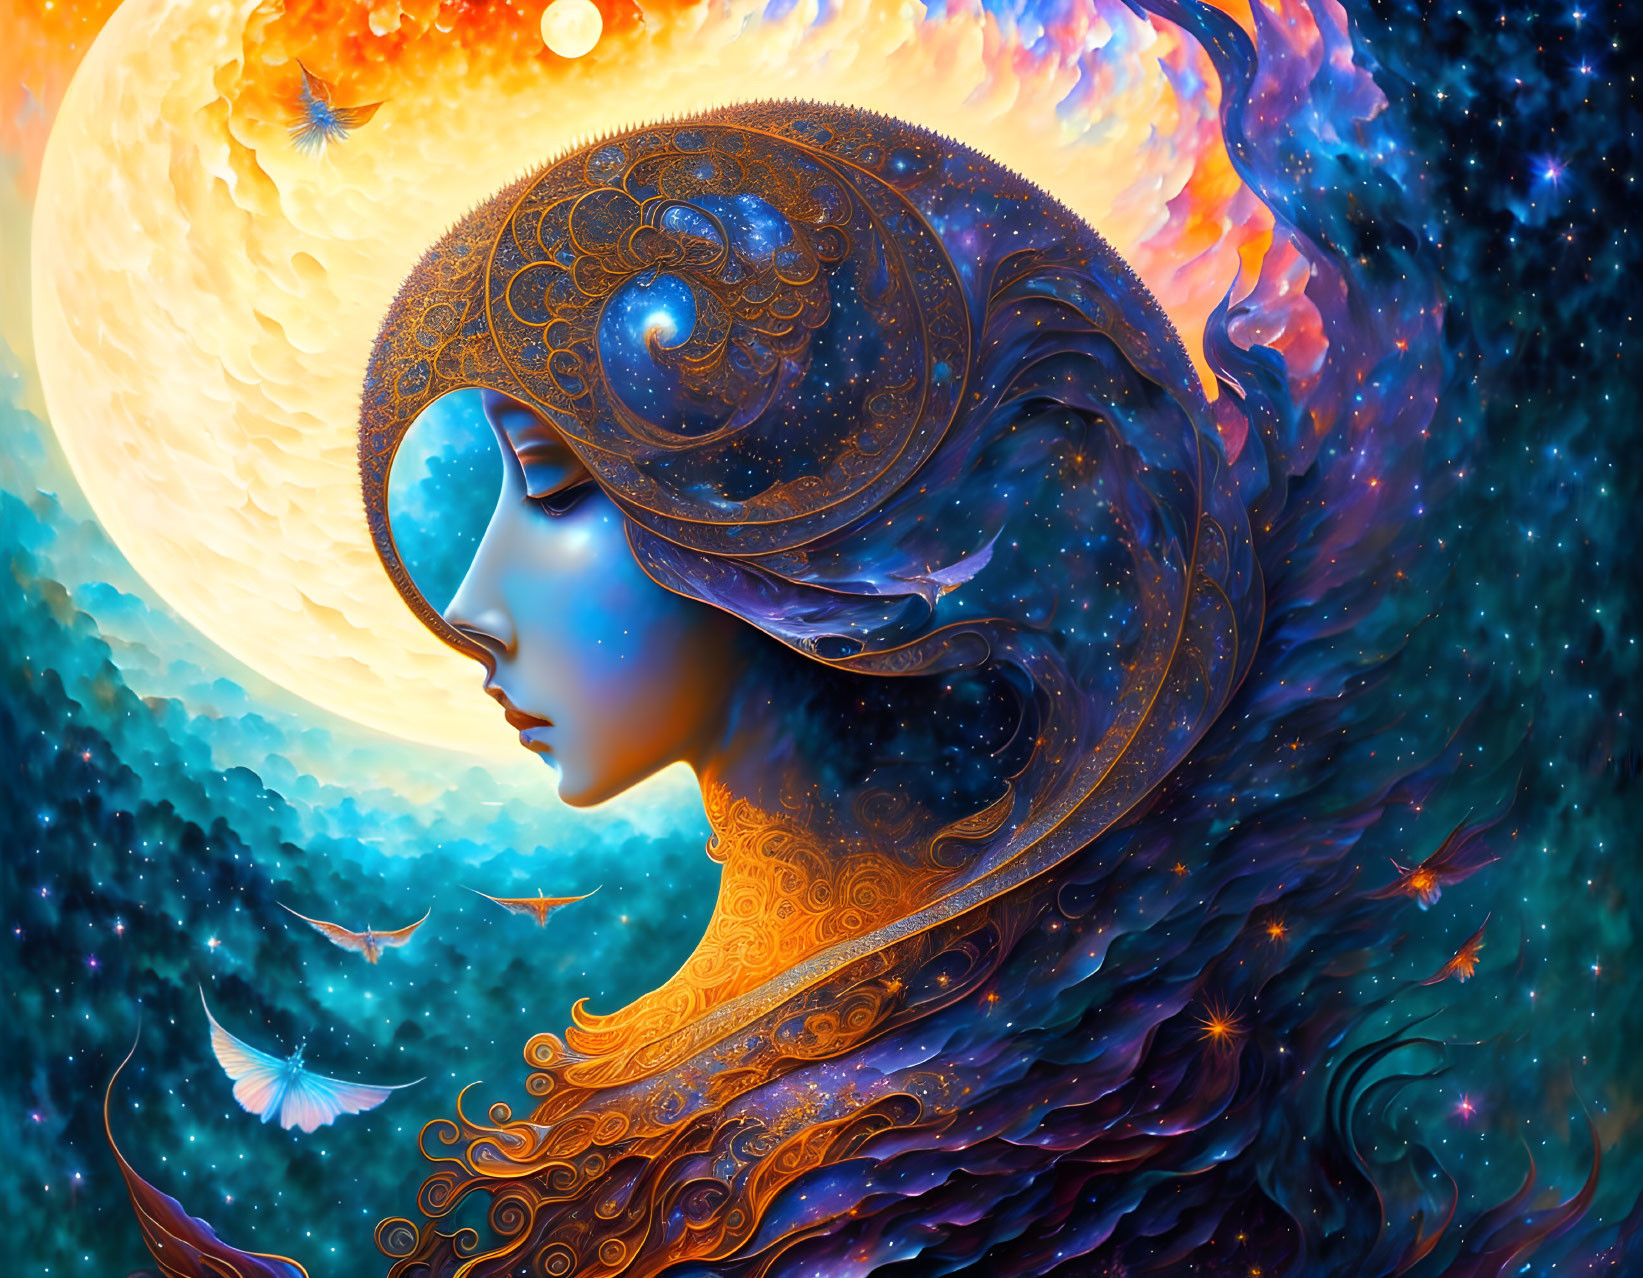 Colorful cosmic female figure merges with starry background and fiery planet